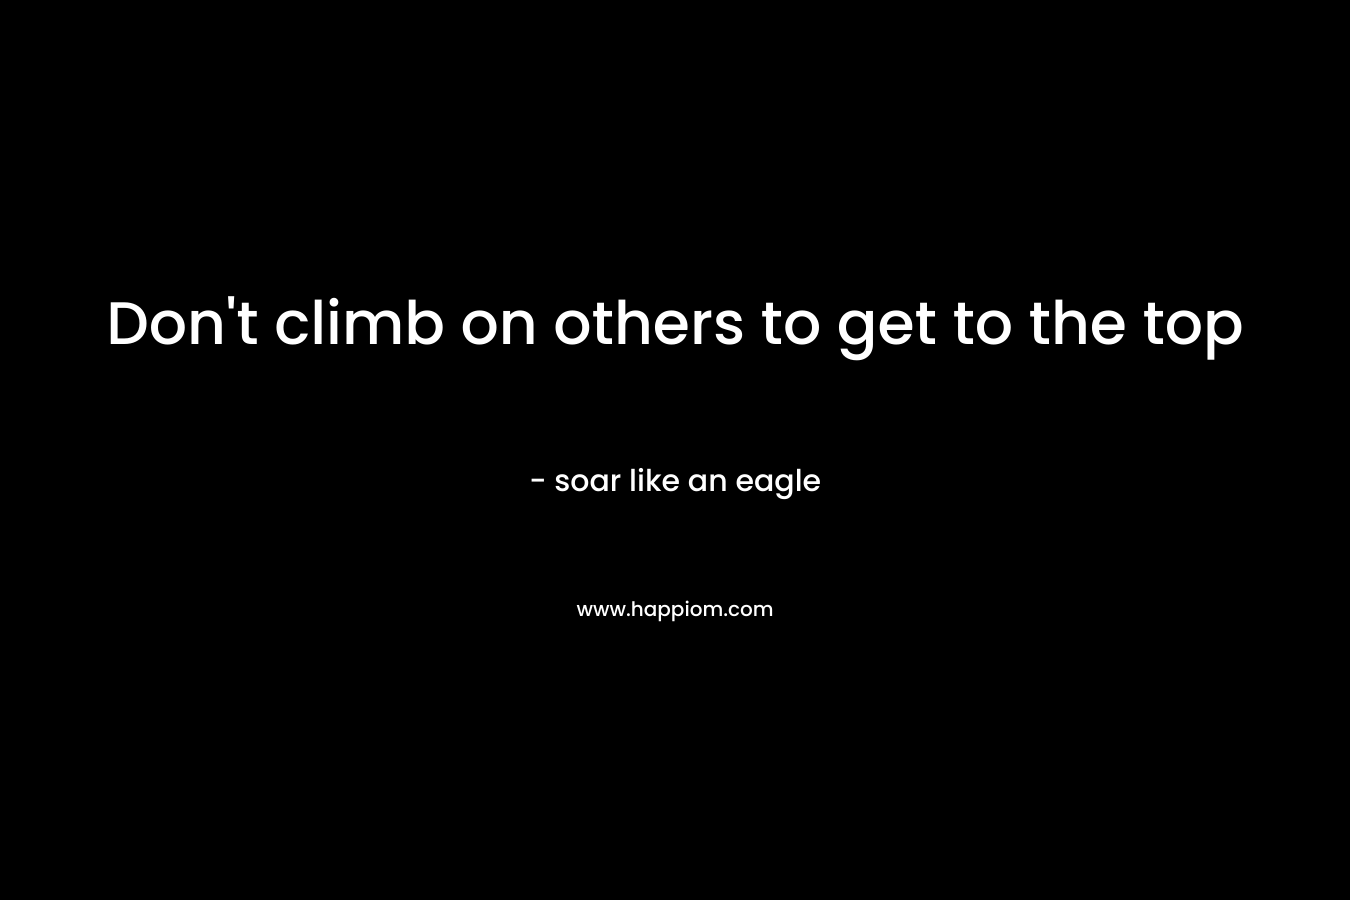 Don't climb on others to get to the top